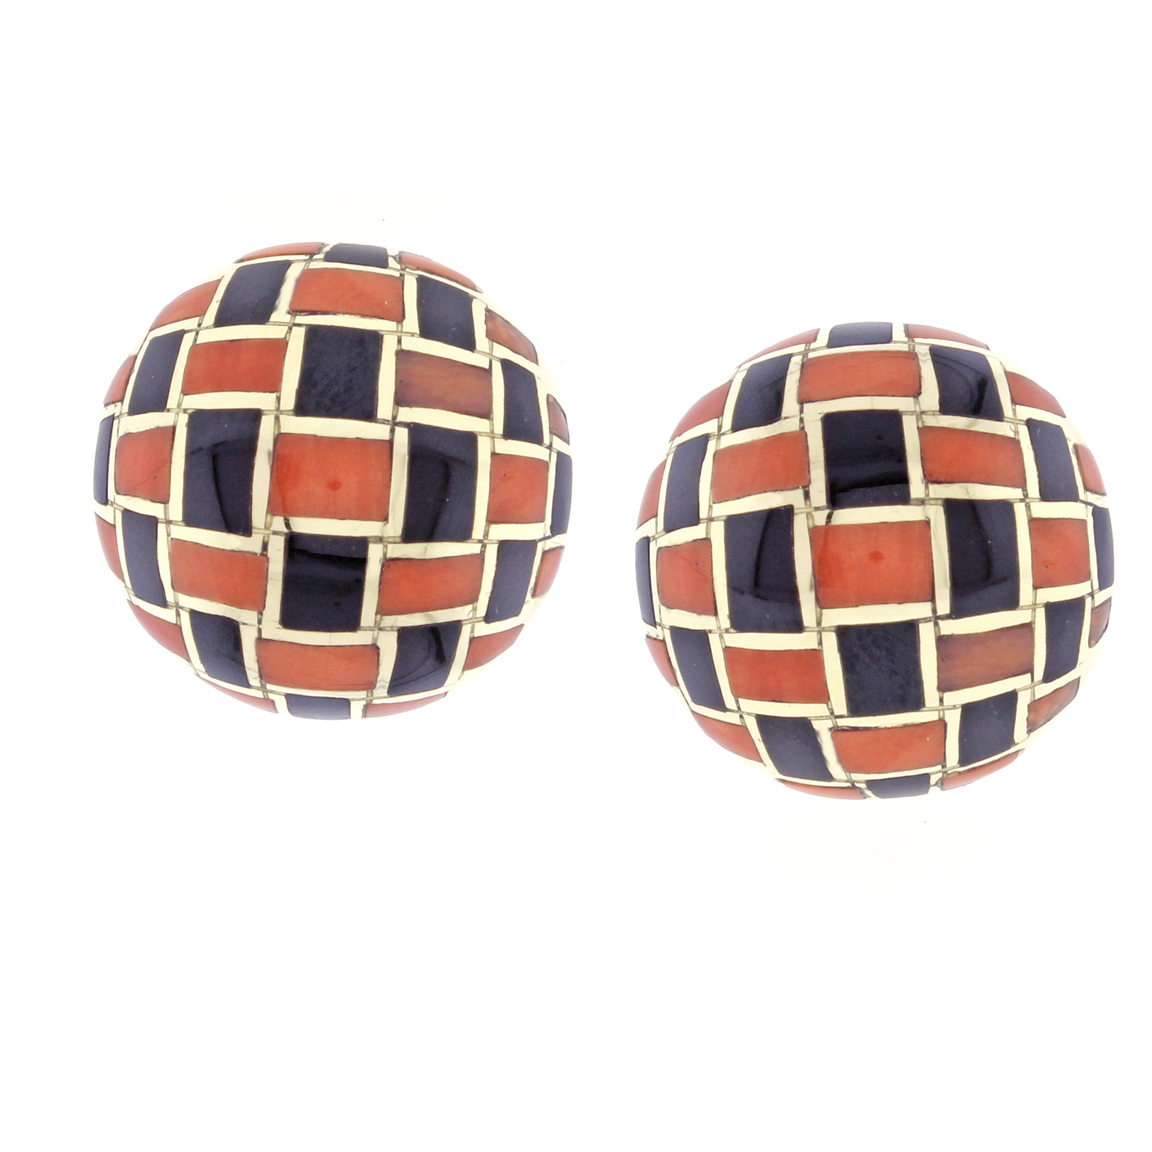 Tiffany & Co. Earrings Coral and Onyx Checker Board | Pampillonia ...